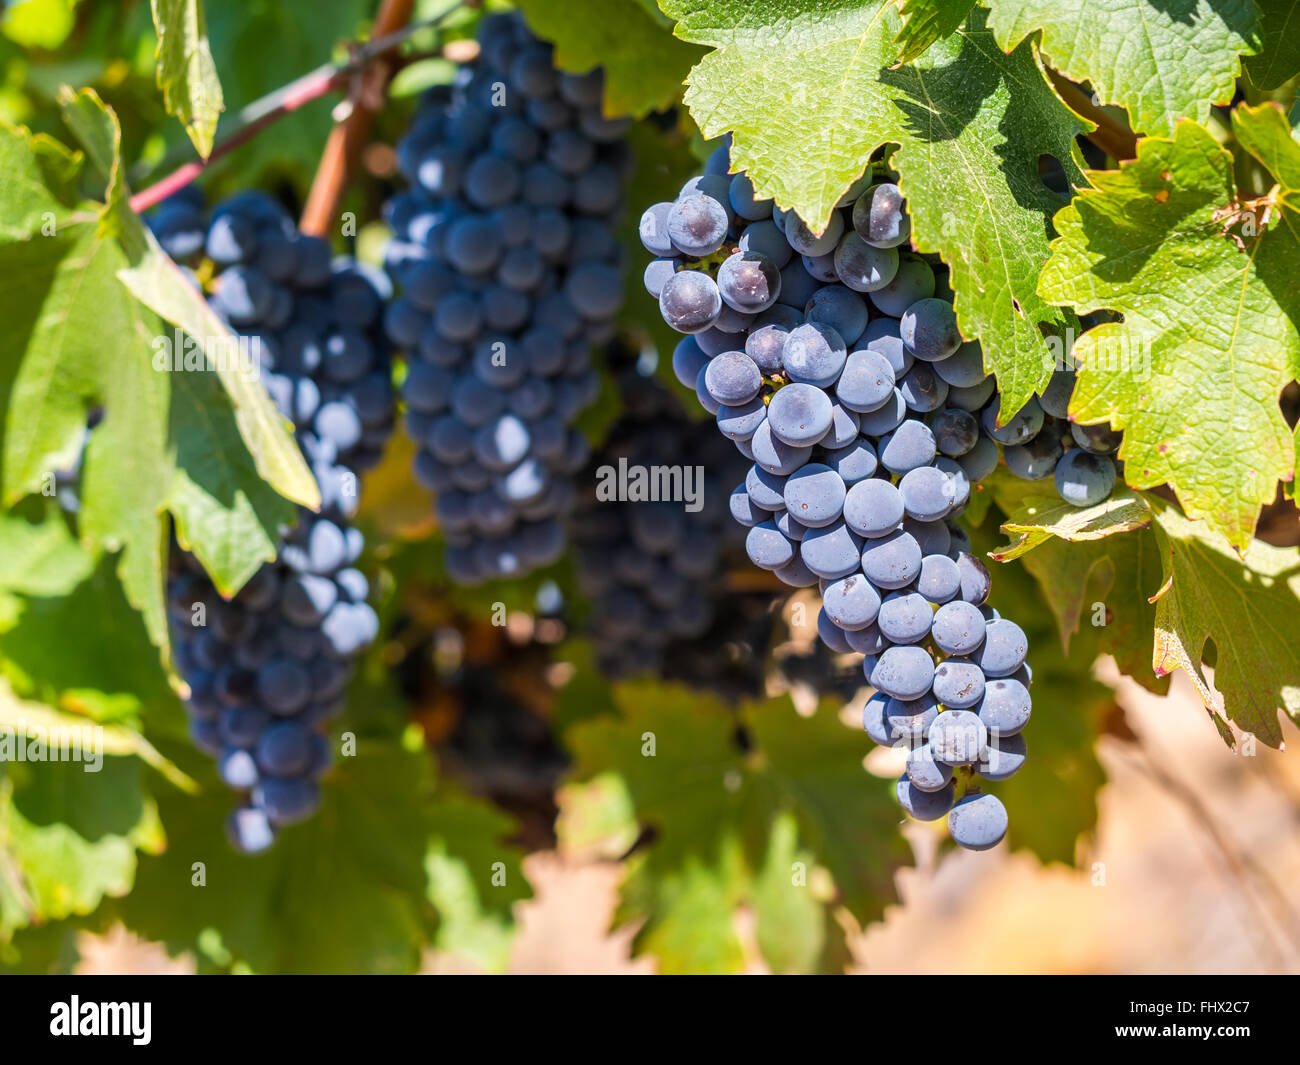 Bunches of red grapes growing in one of the vineyards in Stellenbosh, South Africa. Stock Photo